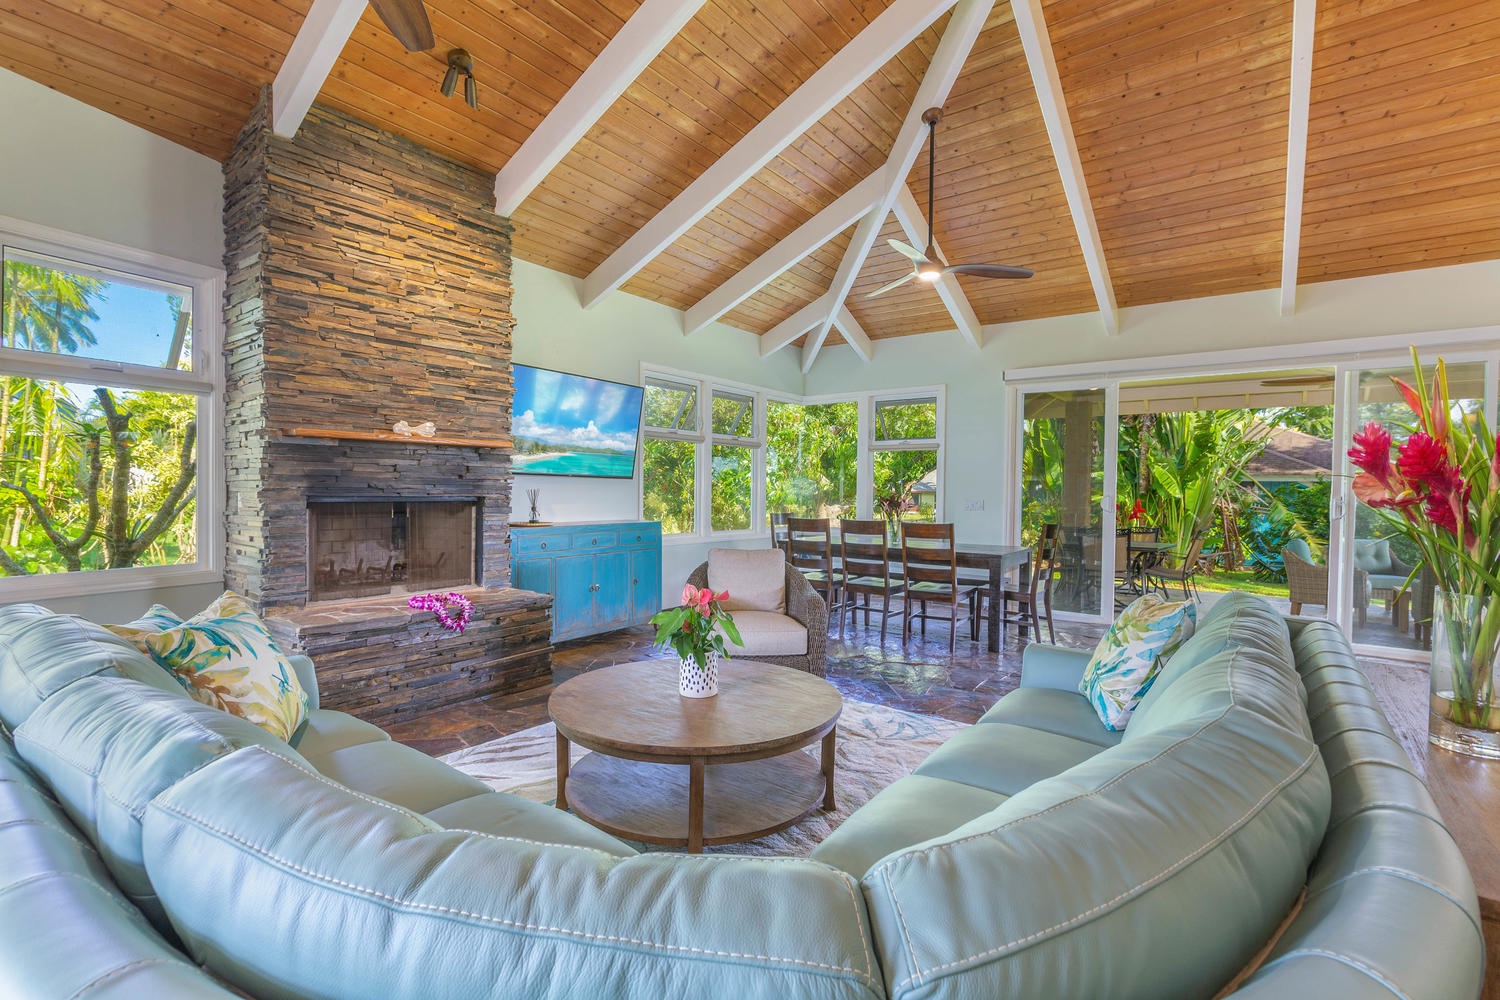 Princeville Vacation Rentals, Pohaku Villa - High ceilings and flagstone floors for a cool atmosphere